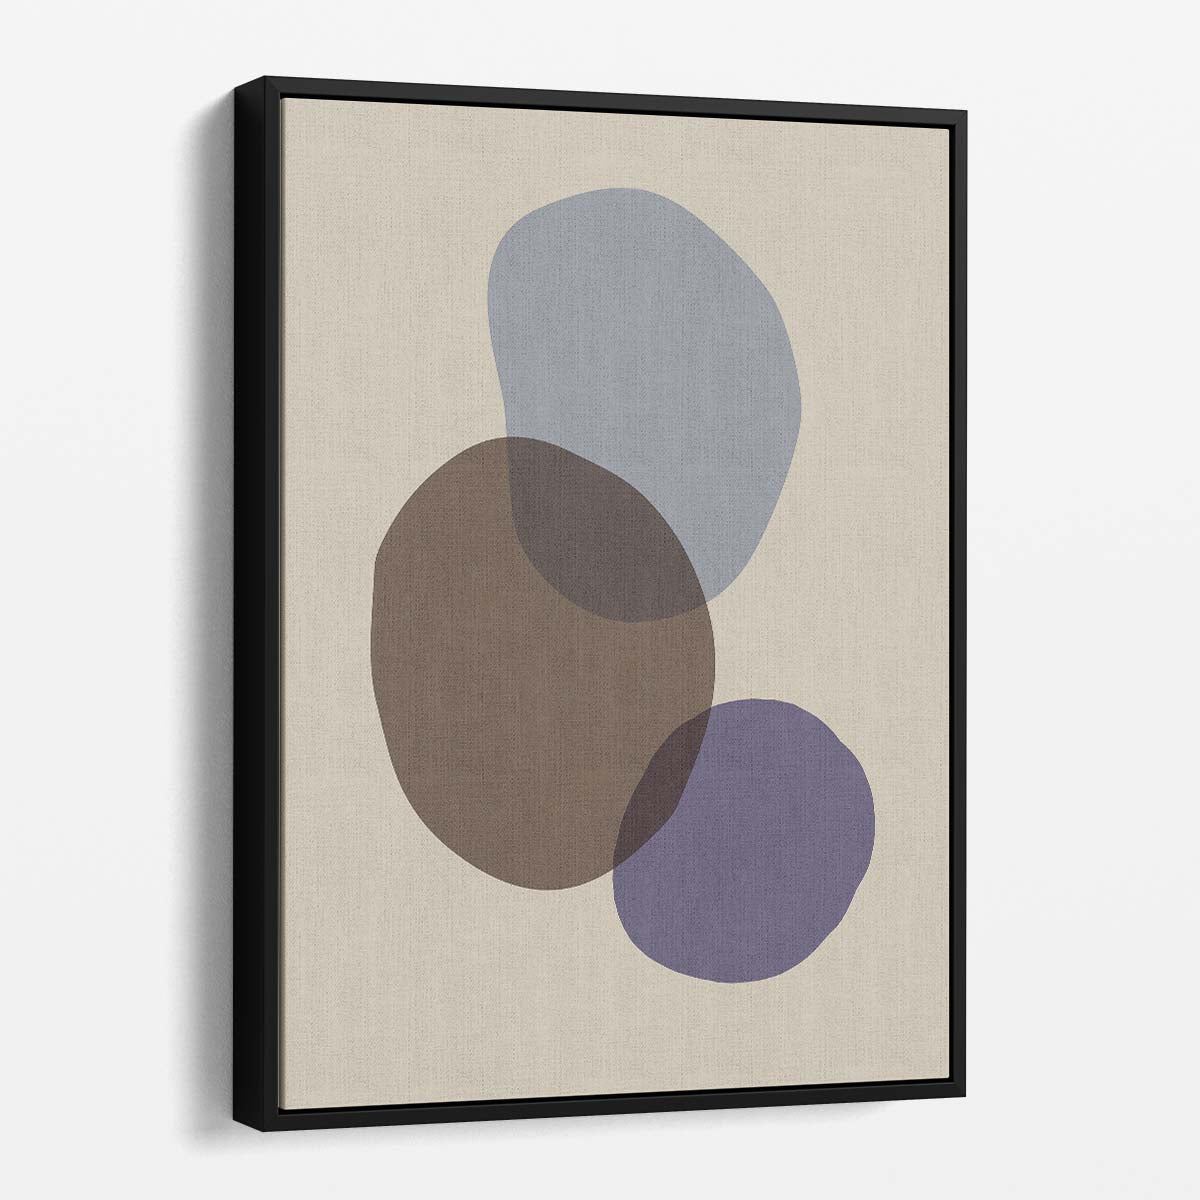 Minimalist Organic Geometry Abstract Illustration Wall Art by Luxuriance Designs, made in USA